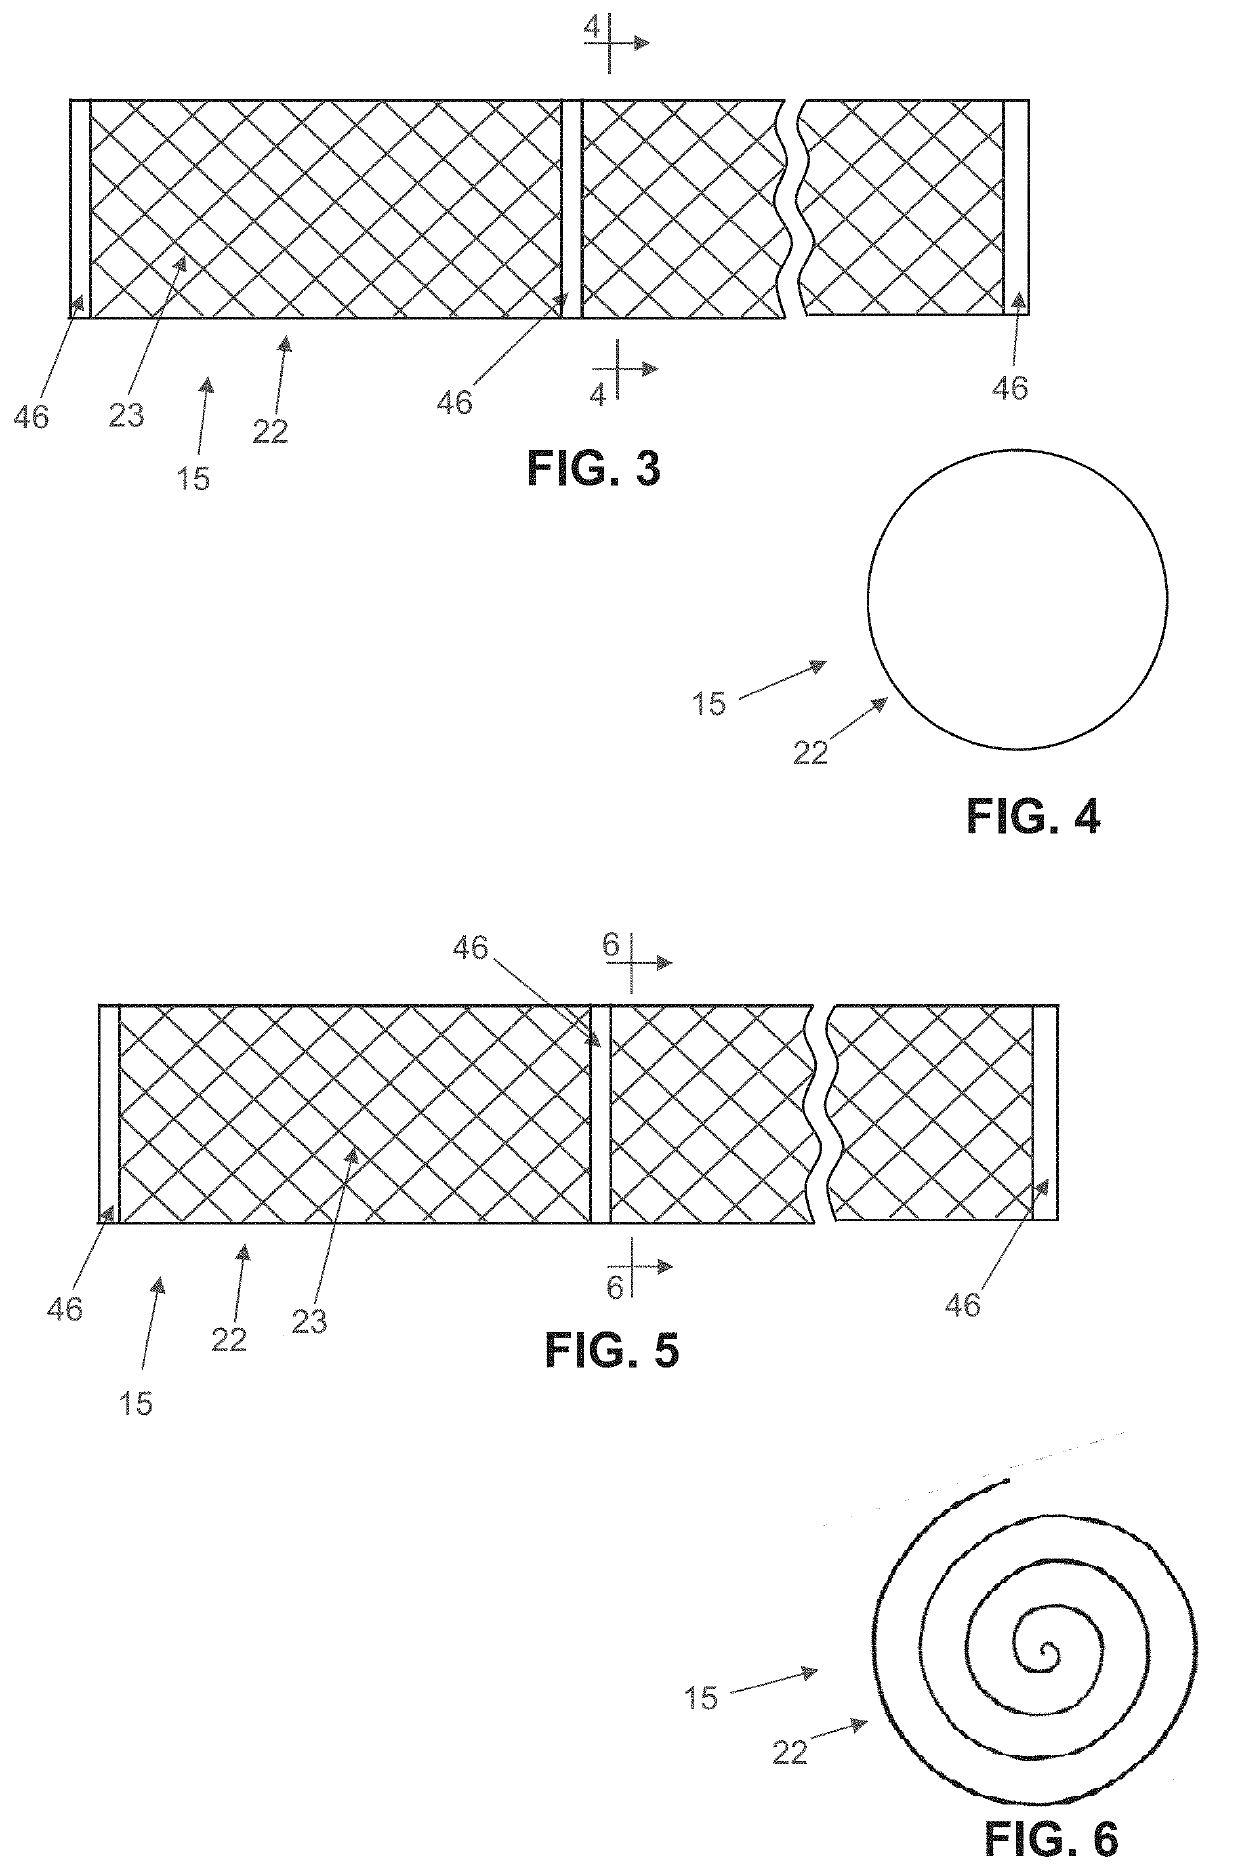 Method and apparatus for treating bone fractures, and/or for fortifying and/or augmenting bone, including the provision and use of composite implants, and novel composite structures which may be used for medical and non-medical applications